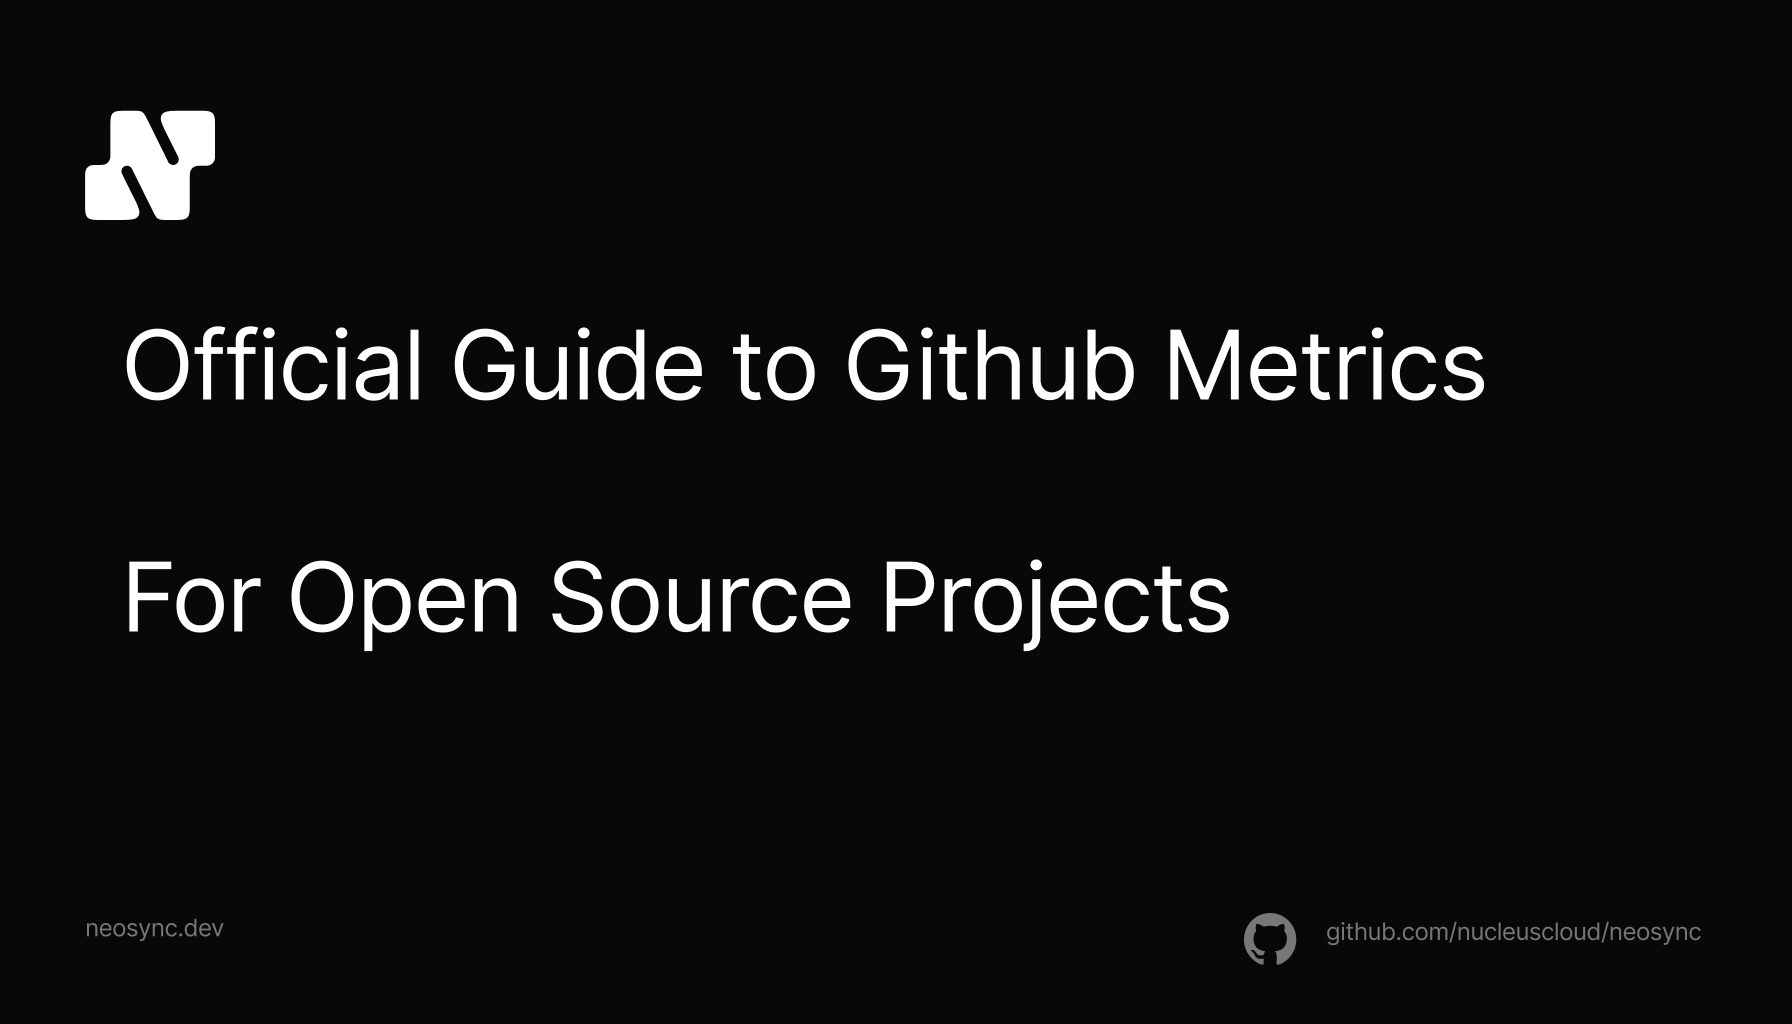 The Official Guide to Github Metrics for Open Source Projects